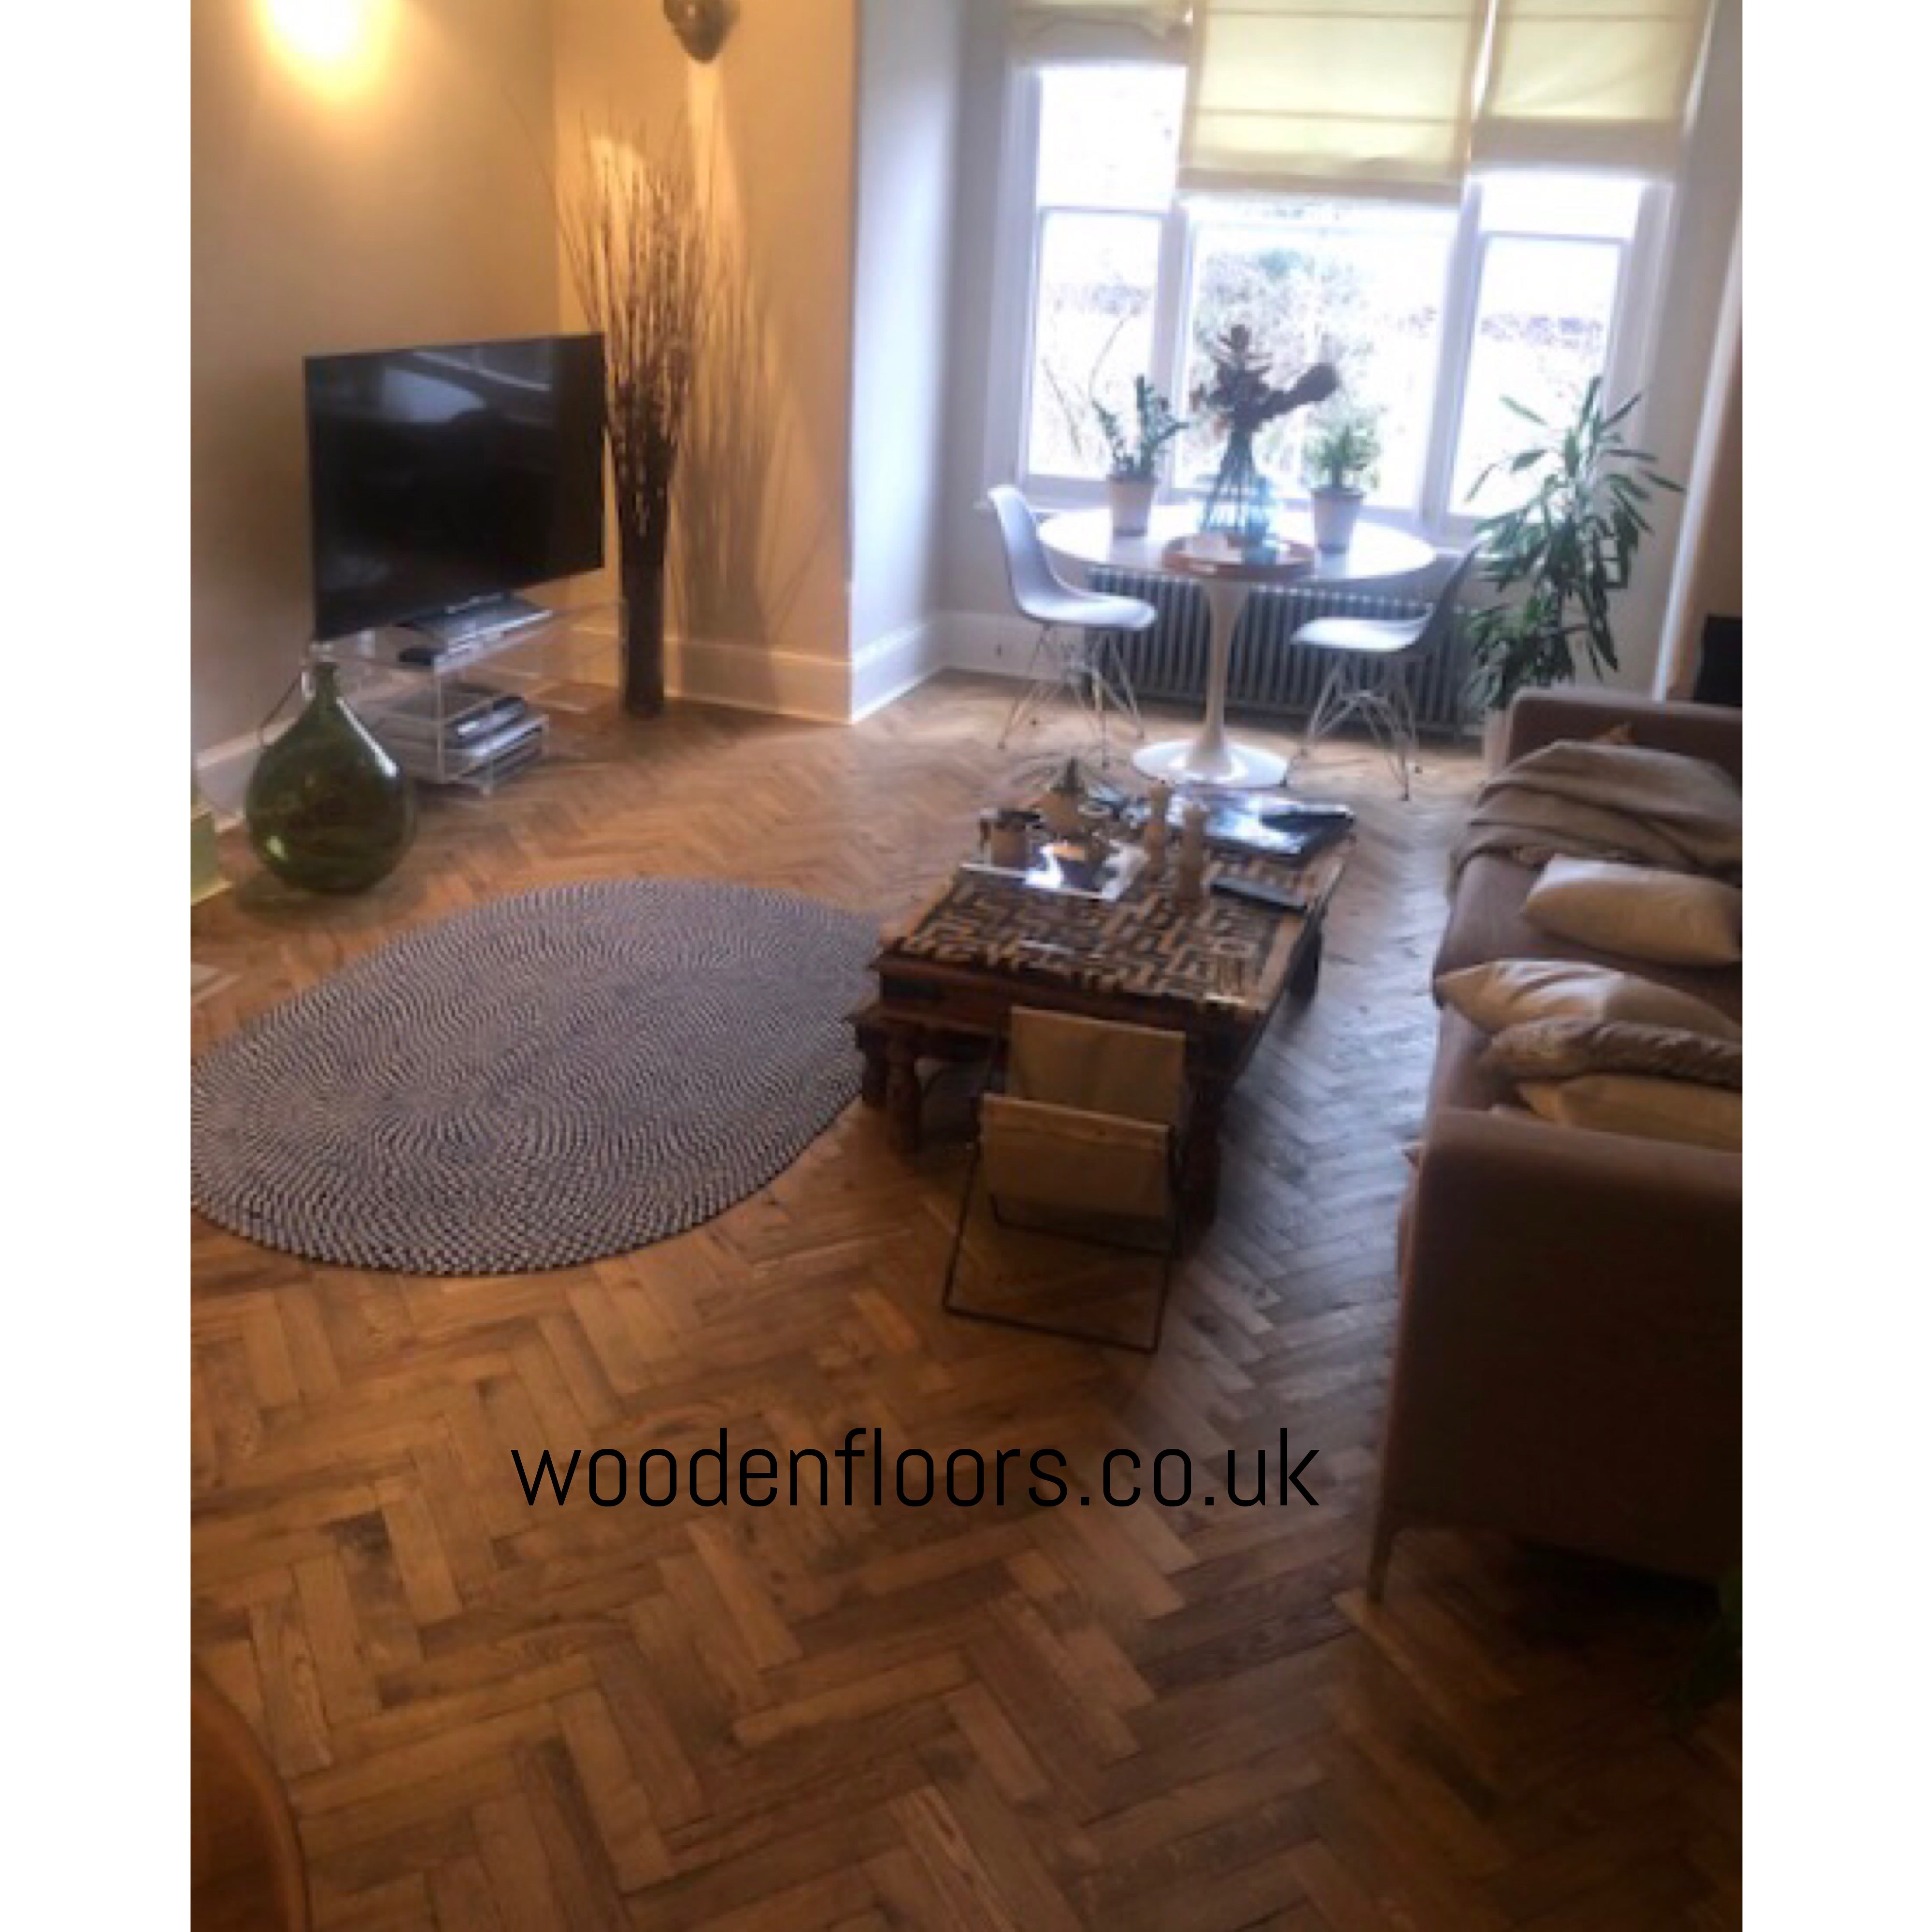 Solid oak parquet flooring Hand finished